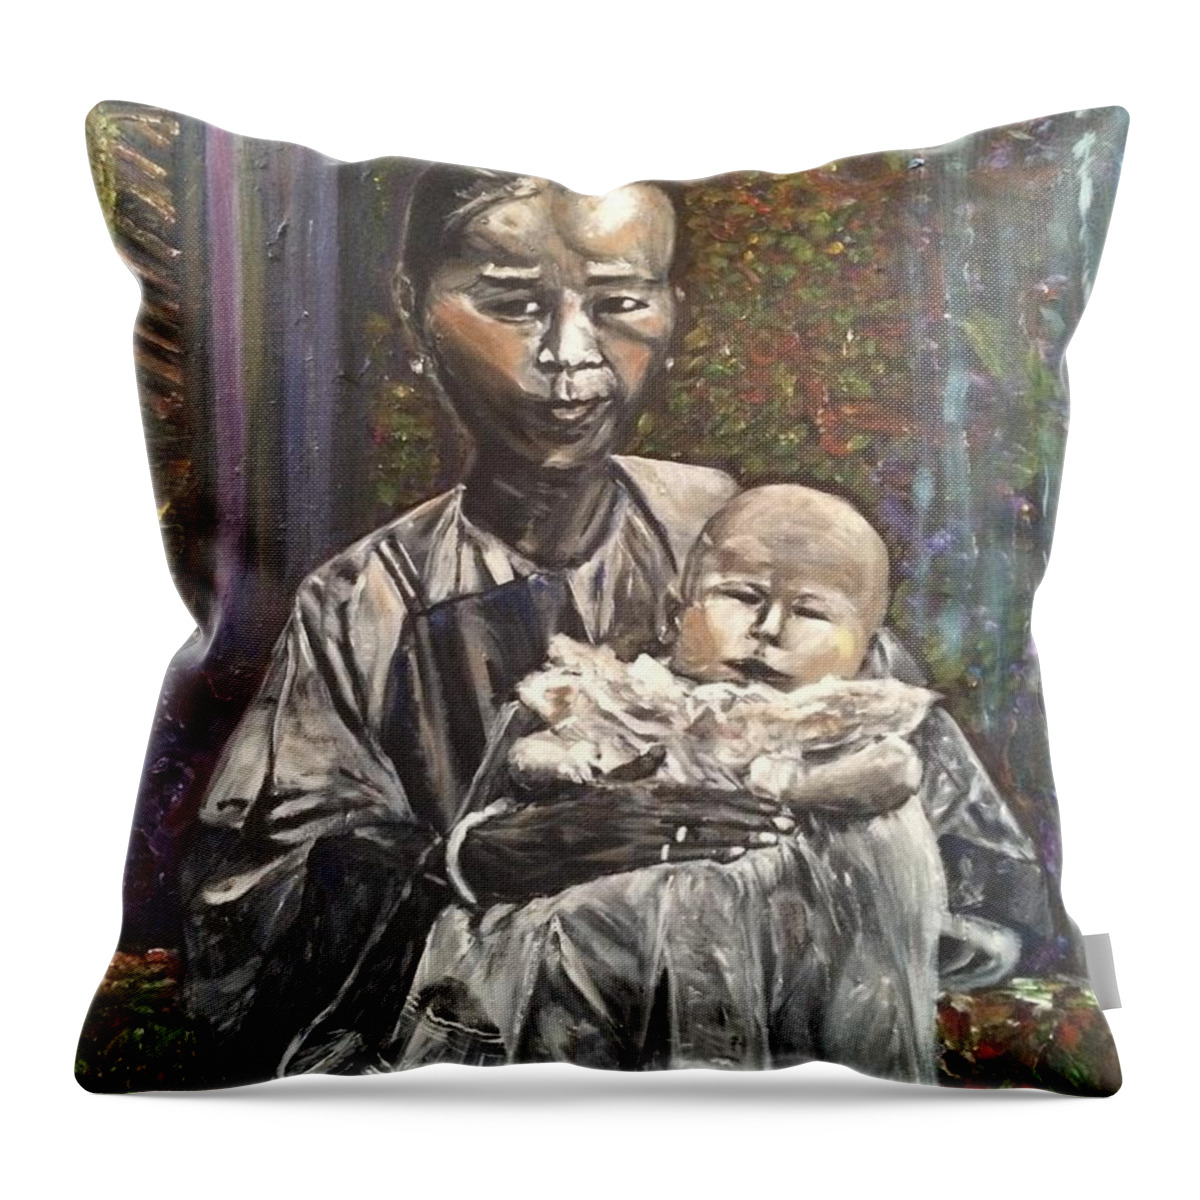 Woman Throw Pillow featuring the painting In My Life by Belinda Low